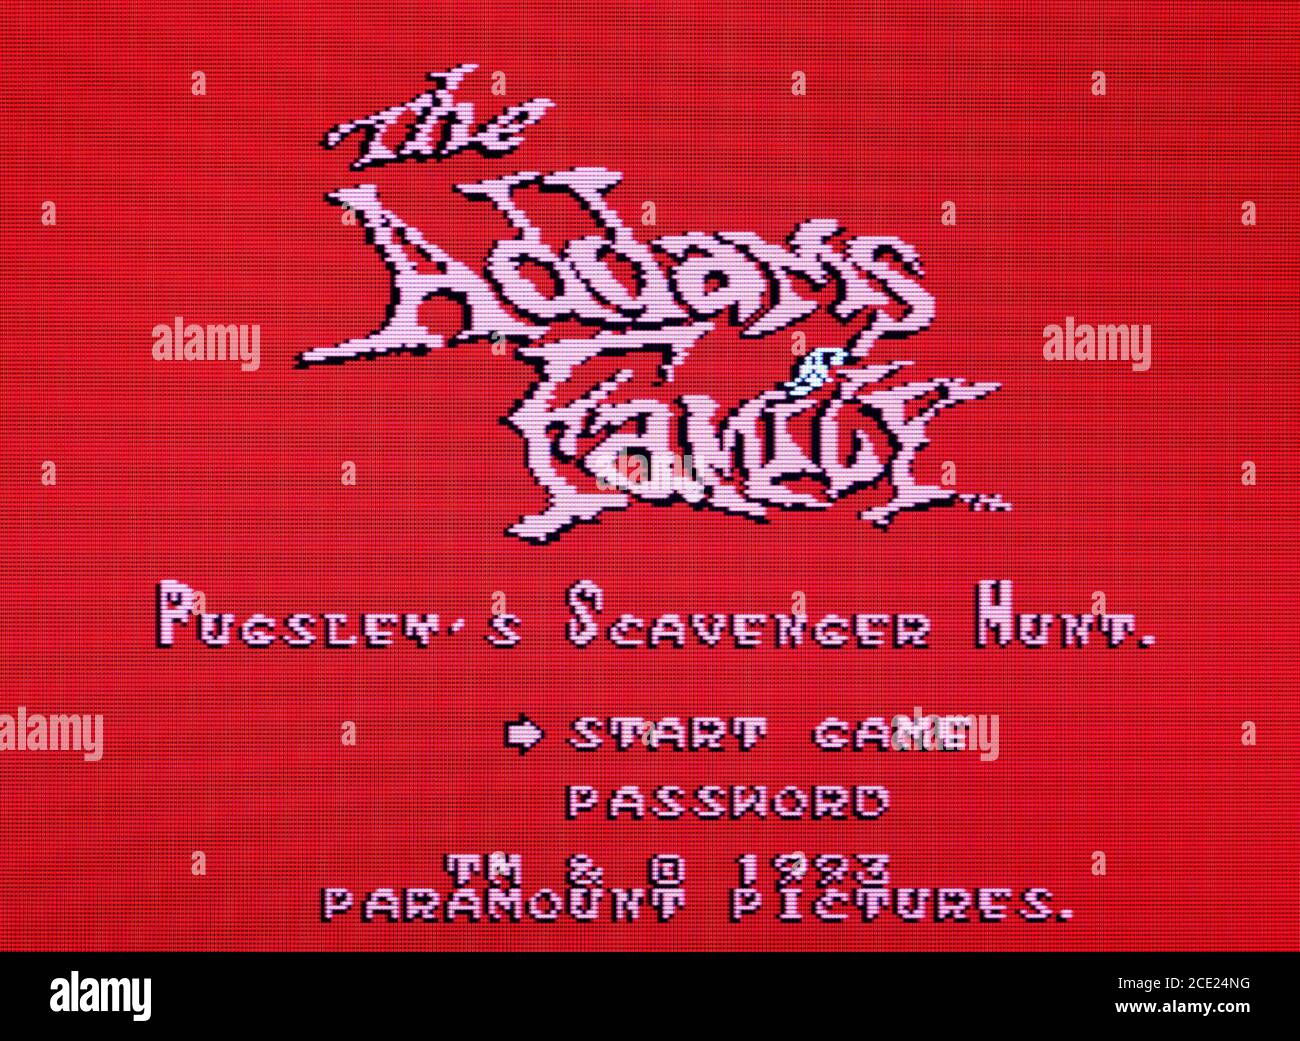 The Addams Family - Pugsley's Scavenger Hunt - Nintendo Entertainment System - NES Videogame - Editorial use only Stock Photo